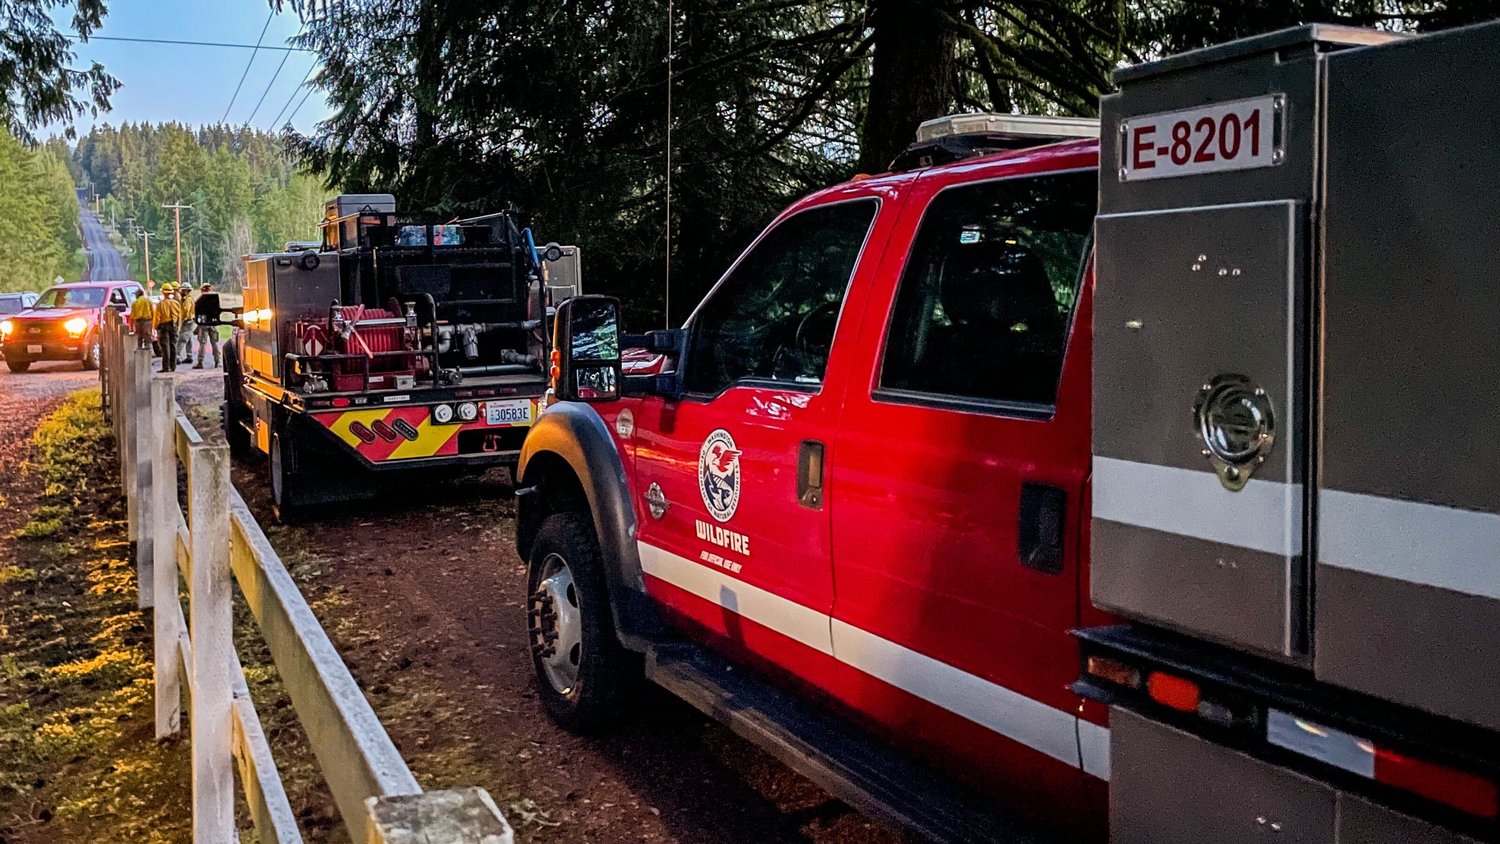 Department of Natural Resources Wildfire crews are seen along McAuley Avenue off Brockway Road while responding to a fire West of Chehalis Sunday evening.